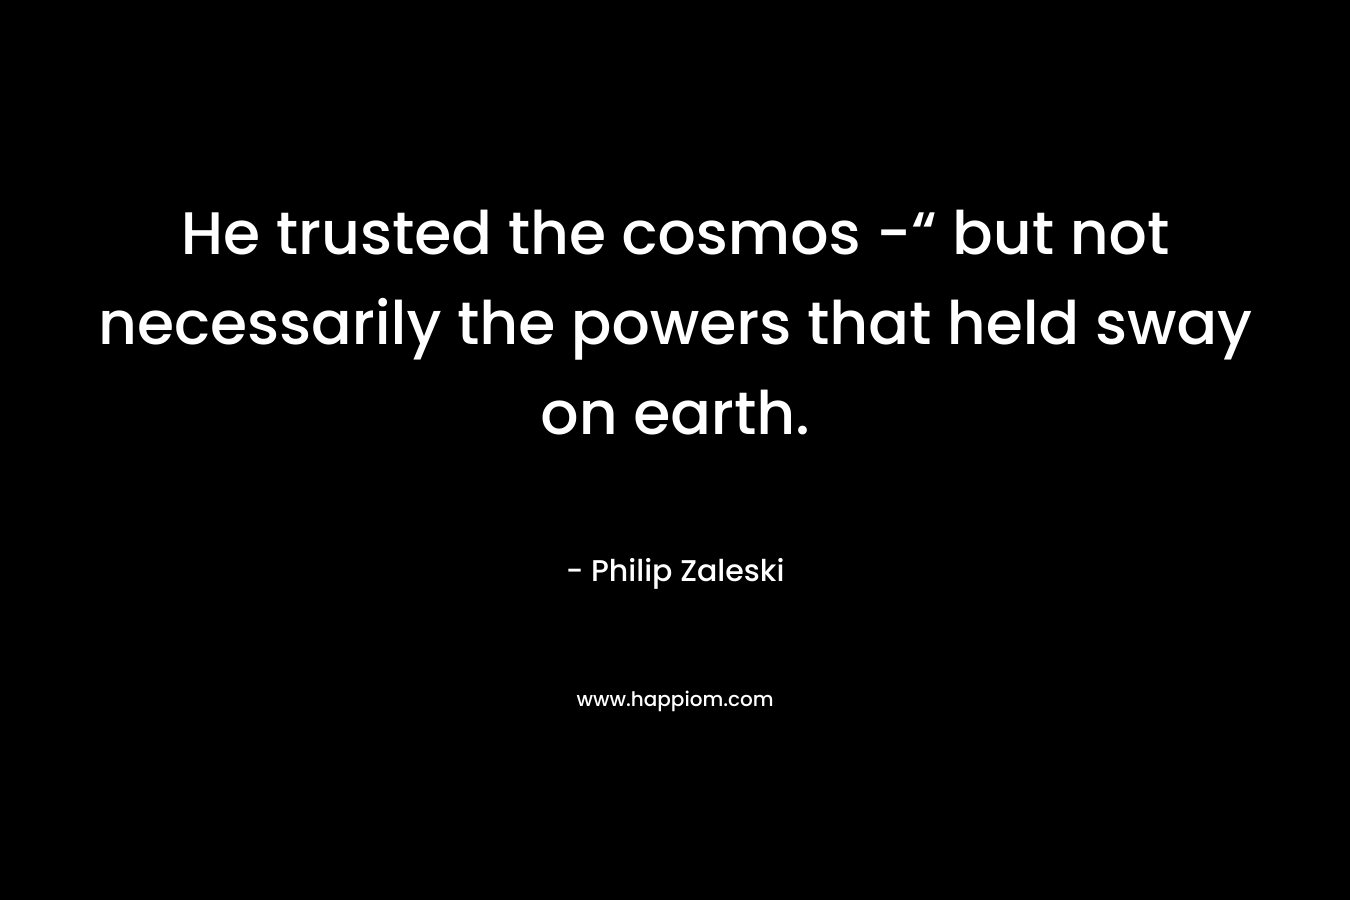 He trusted the cosmos -“ but not necessarily the powers that held sway on earth.